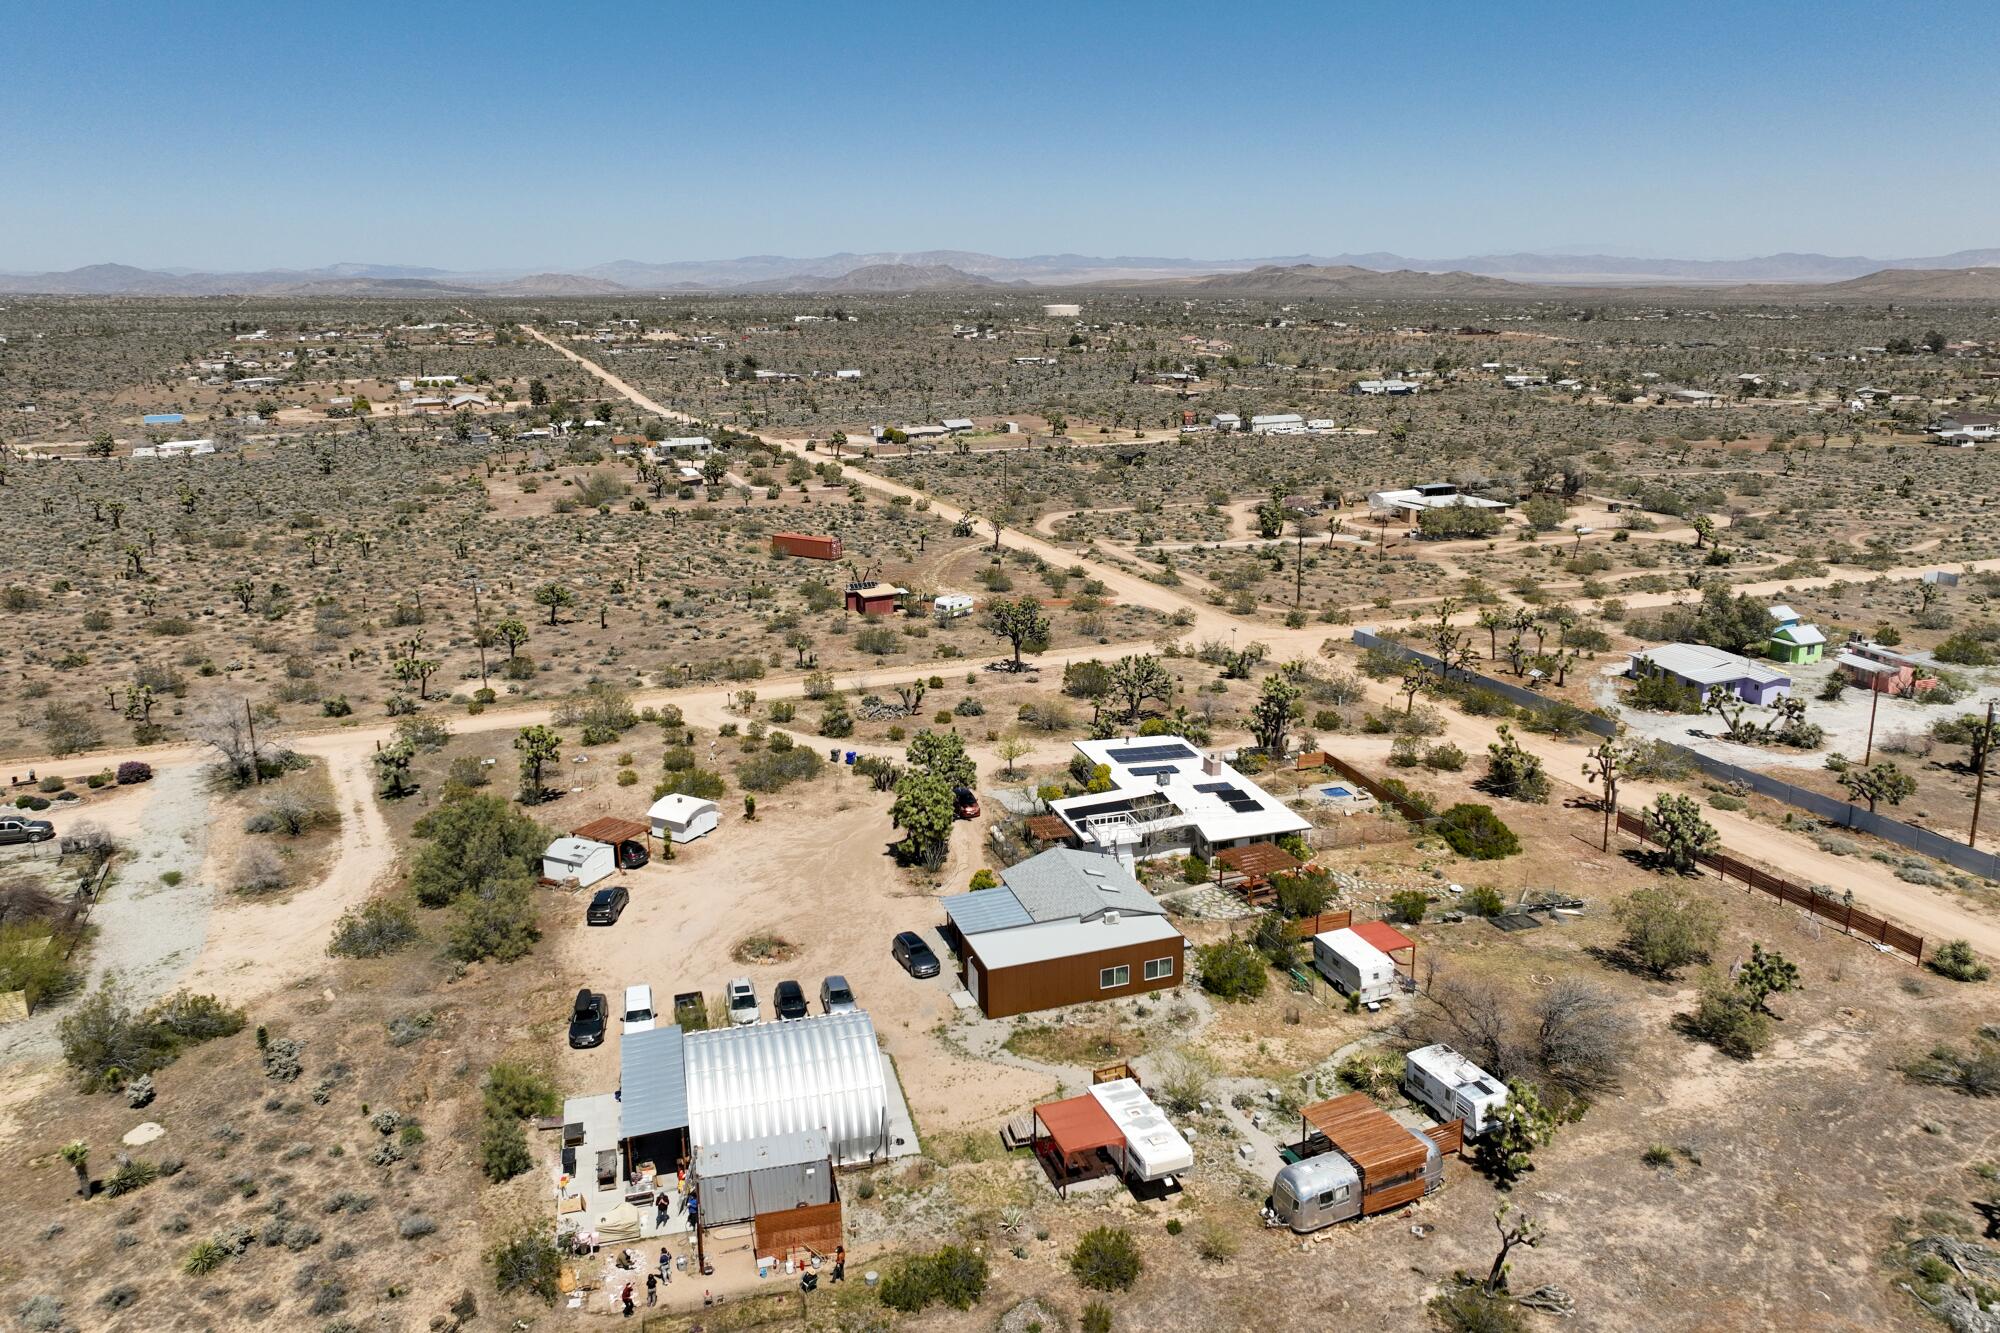 The buildings sprawl across a desert property dotted with bushes and trees.